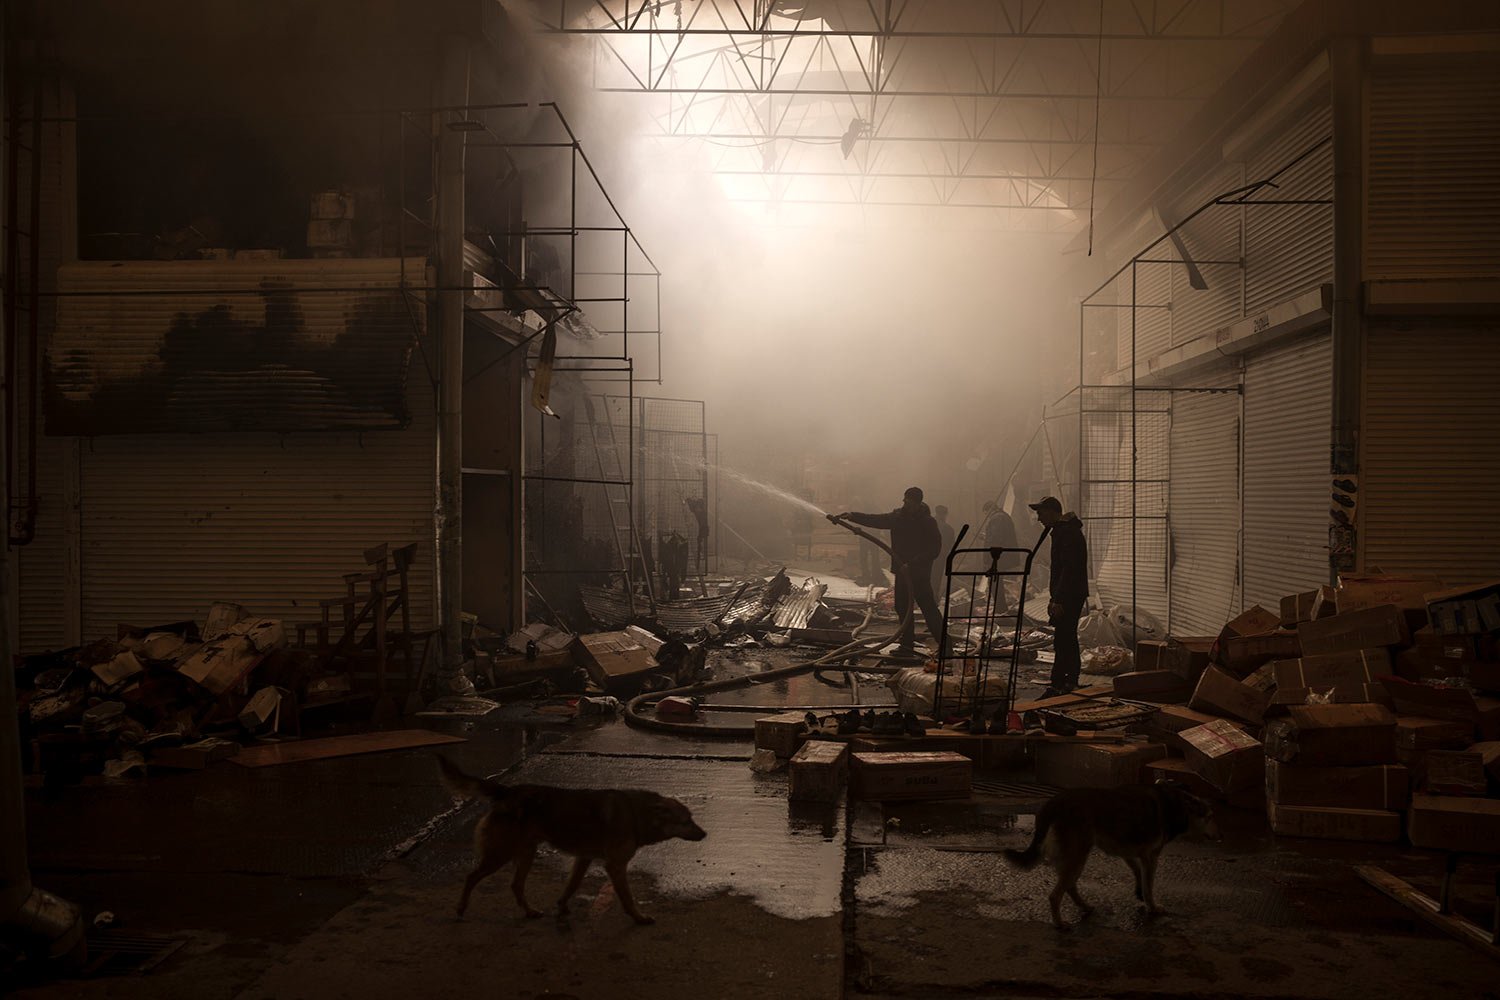  People try to extinguish a fire in a market after a Russian attack in Kharkiv, Ukraine, Friday, March 25, 2022. (AP Photo/Felipe Dana) 